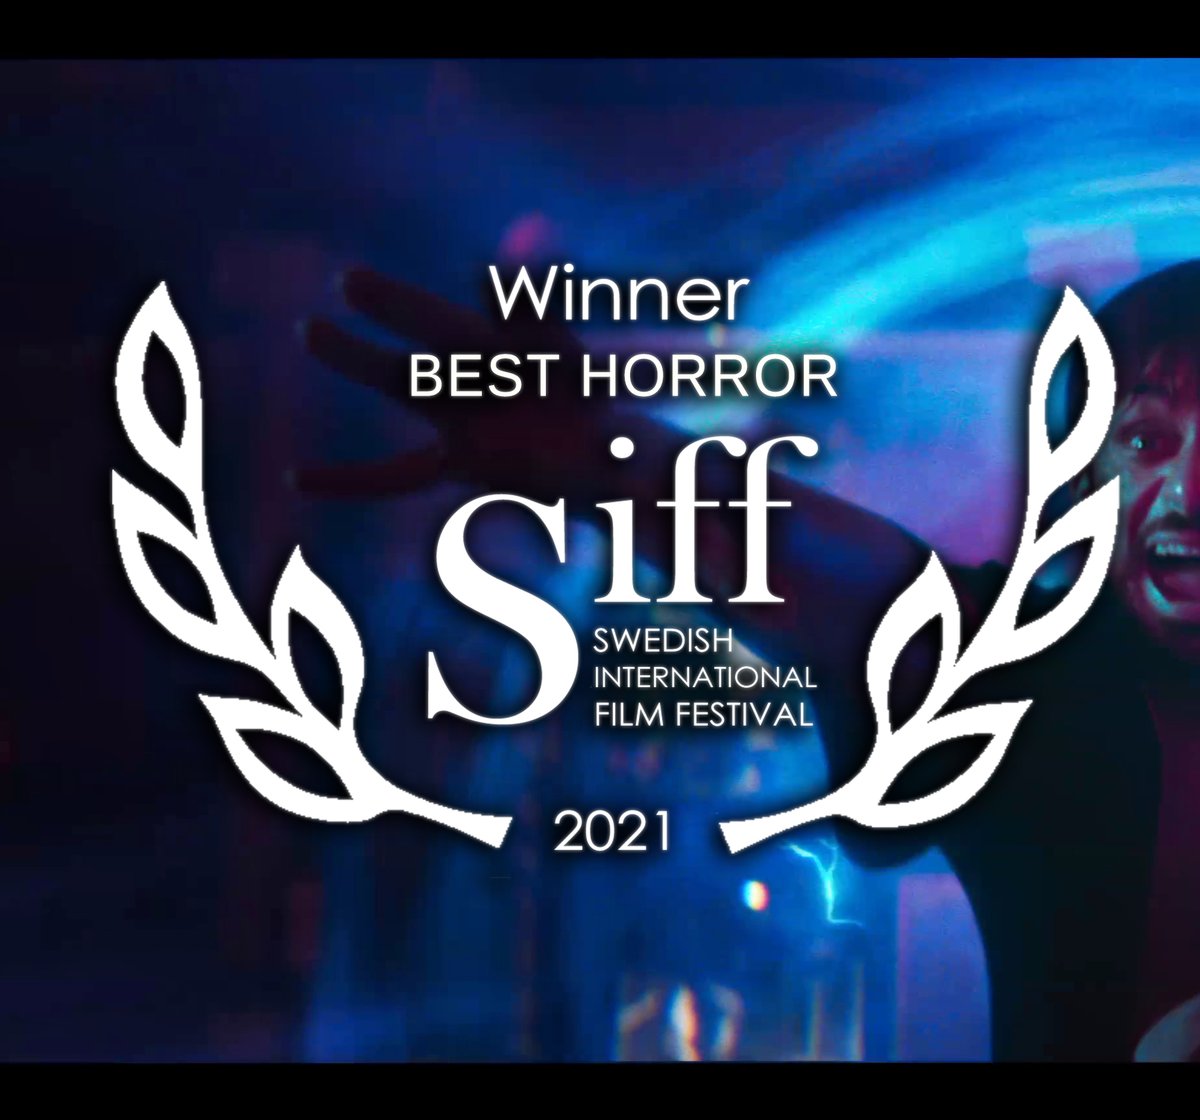 Going Global Again!! WINNER for BEST HORROR at #siff2021 @CineSweden !! #Escalation will screen in Arvika Ritz, Sweden and I cannot wait to attend in person!! Thanks to the SIFF team for this award! #festivalaward #bestofthefest #swedishinternationalfilmfestival #christianbachini